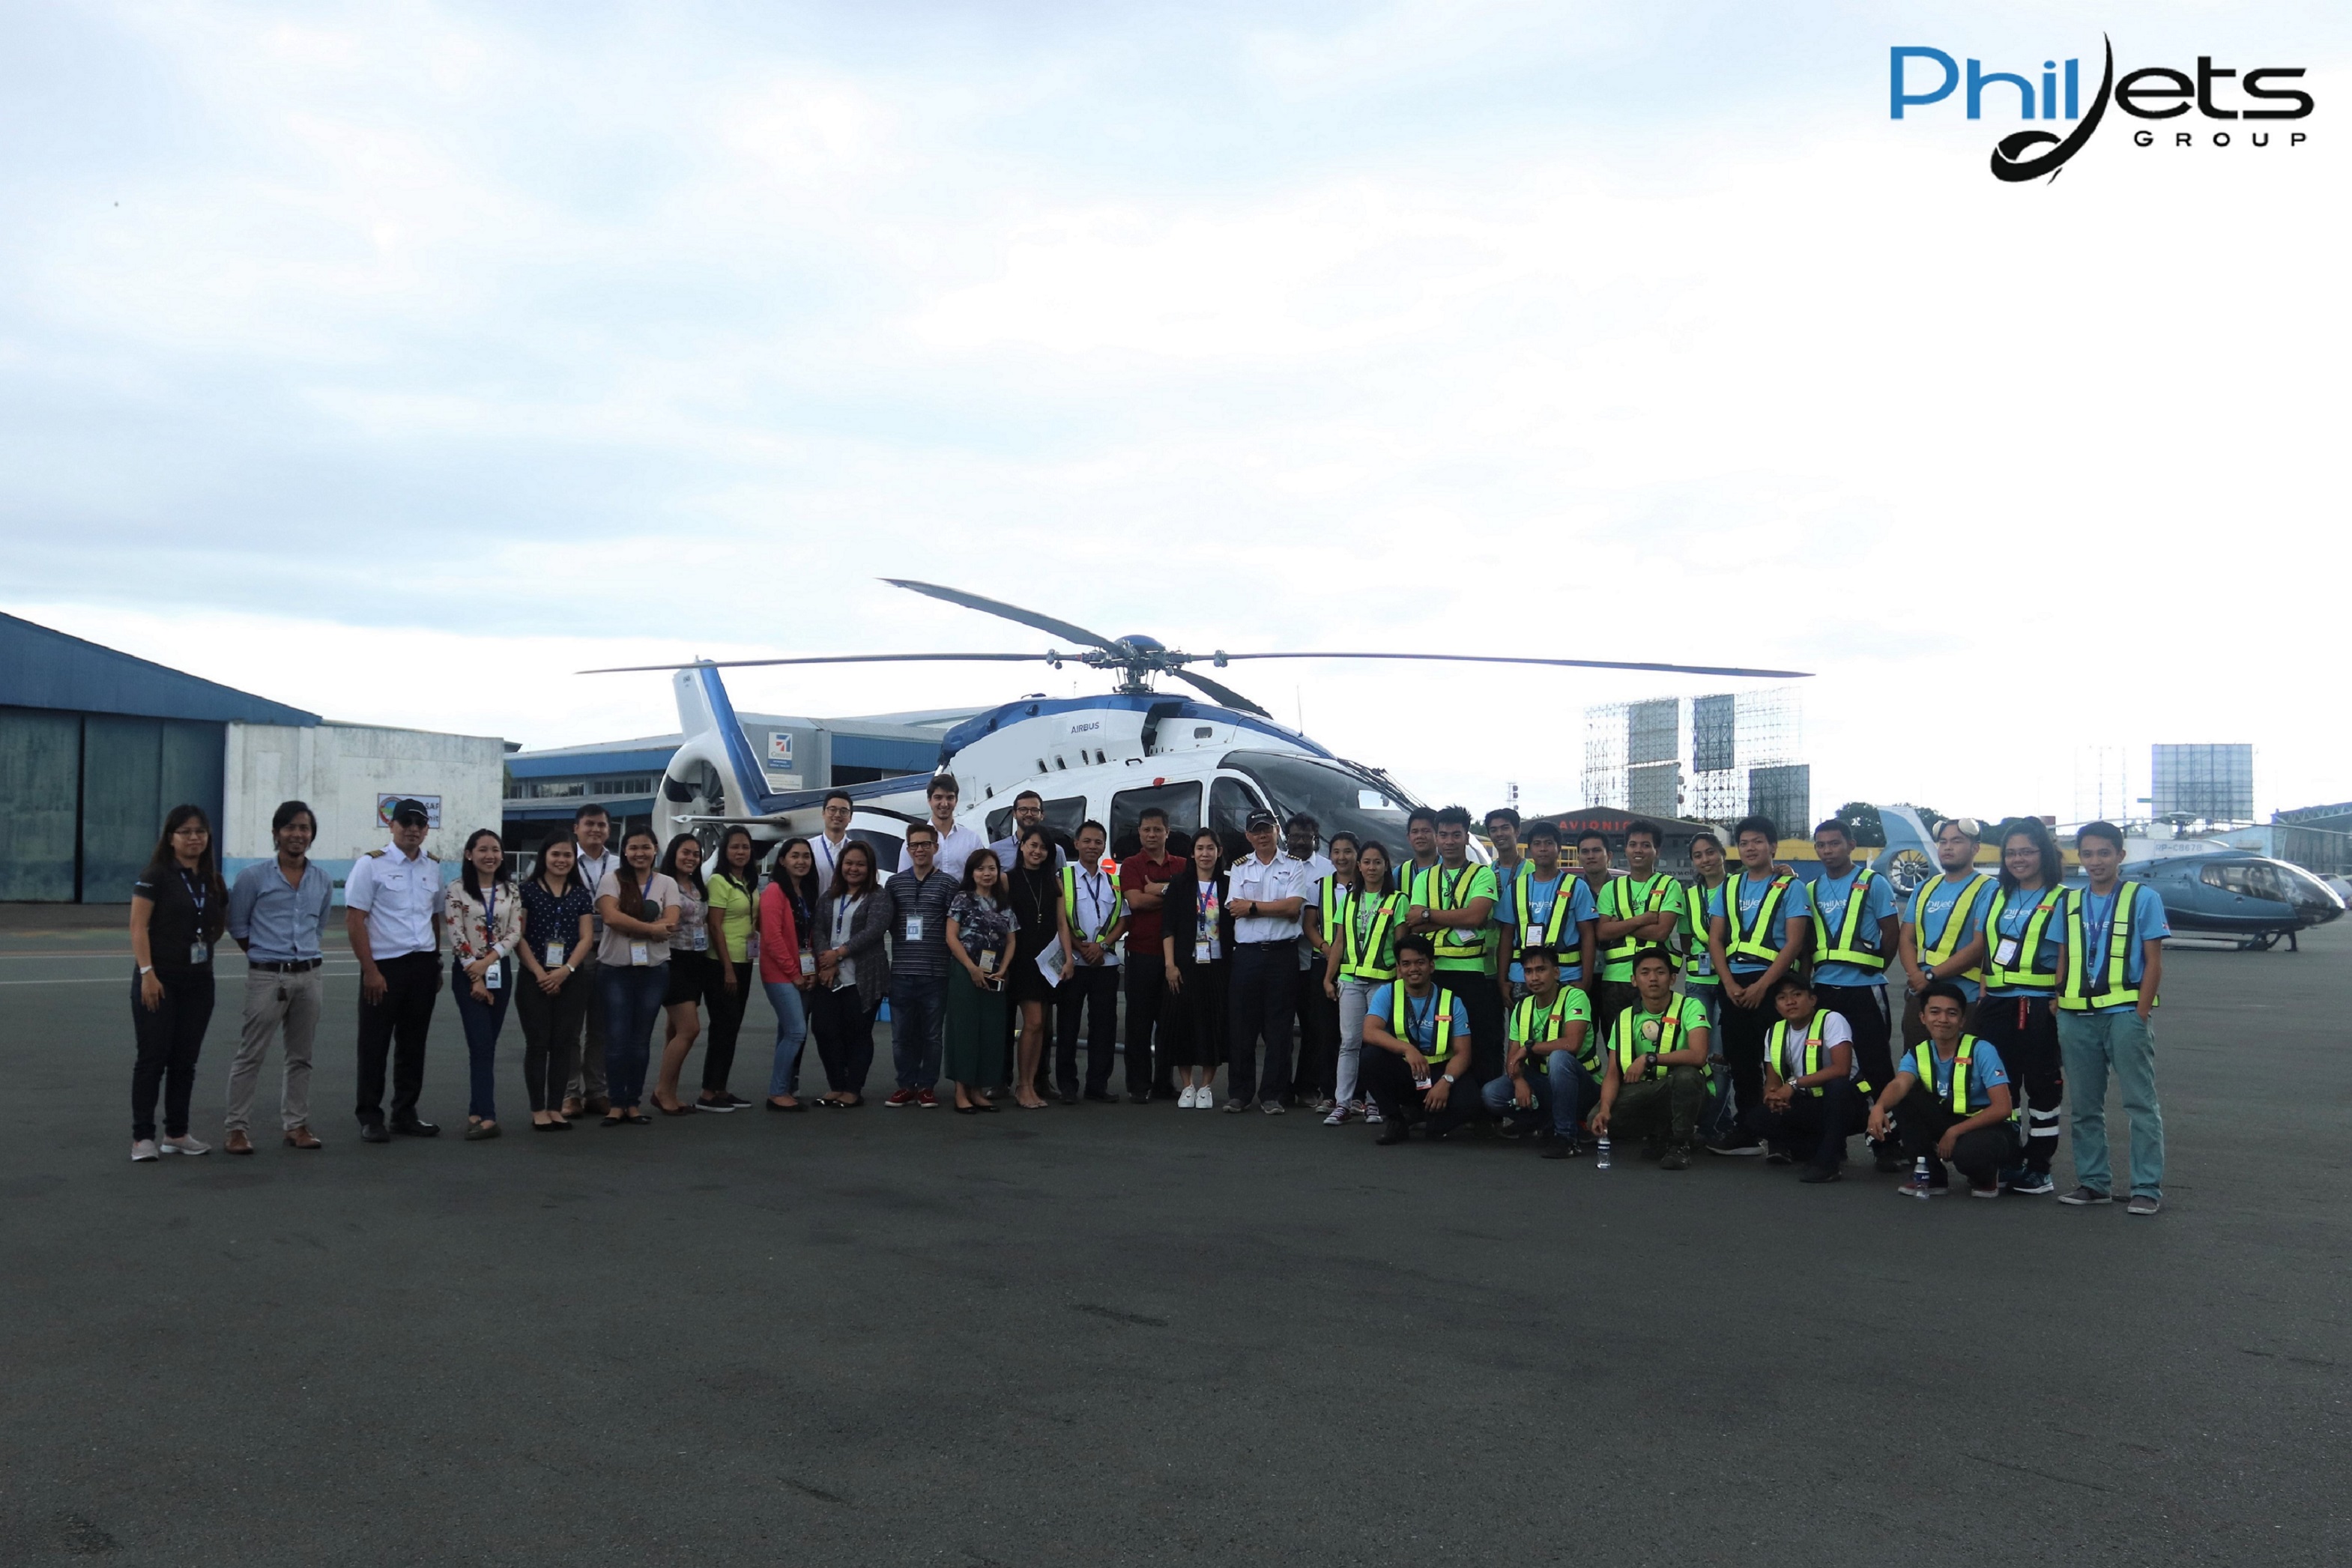 PhilJets welcomes new aircraft for helitours and charter service